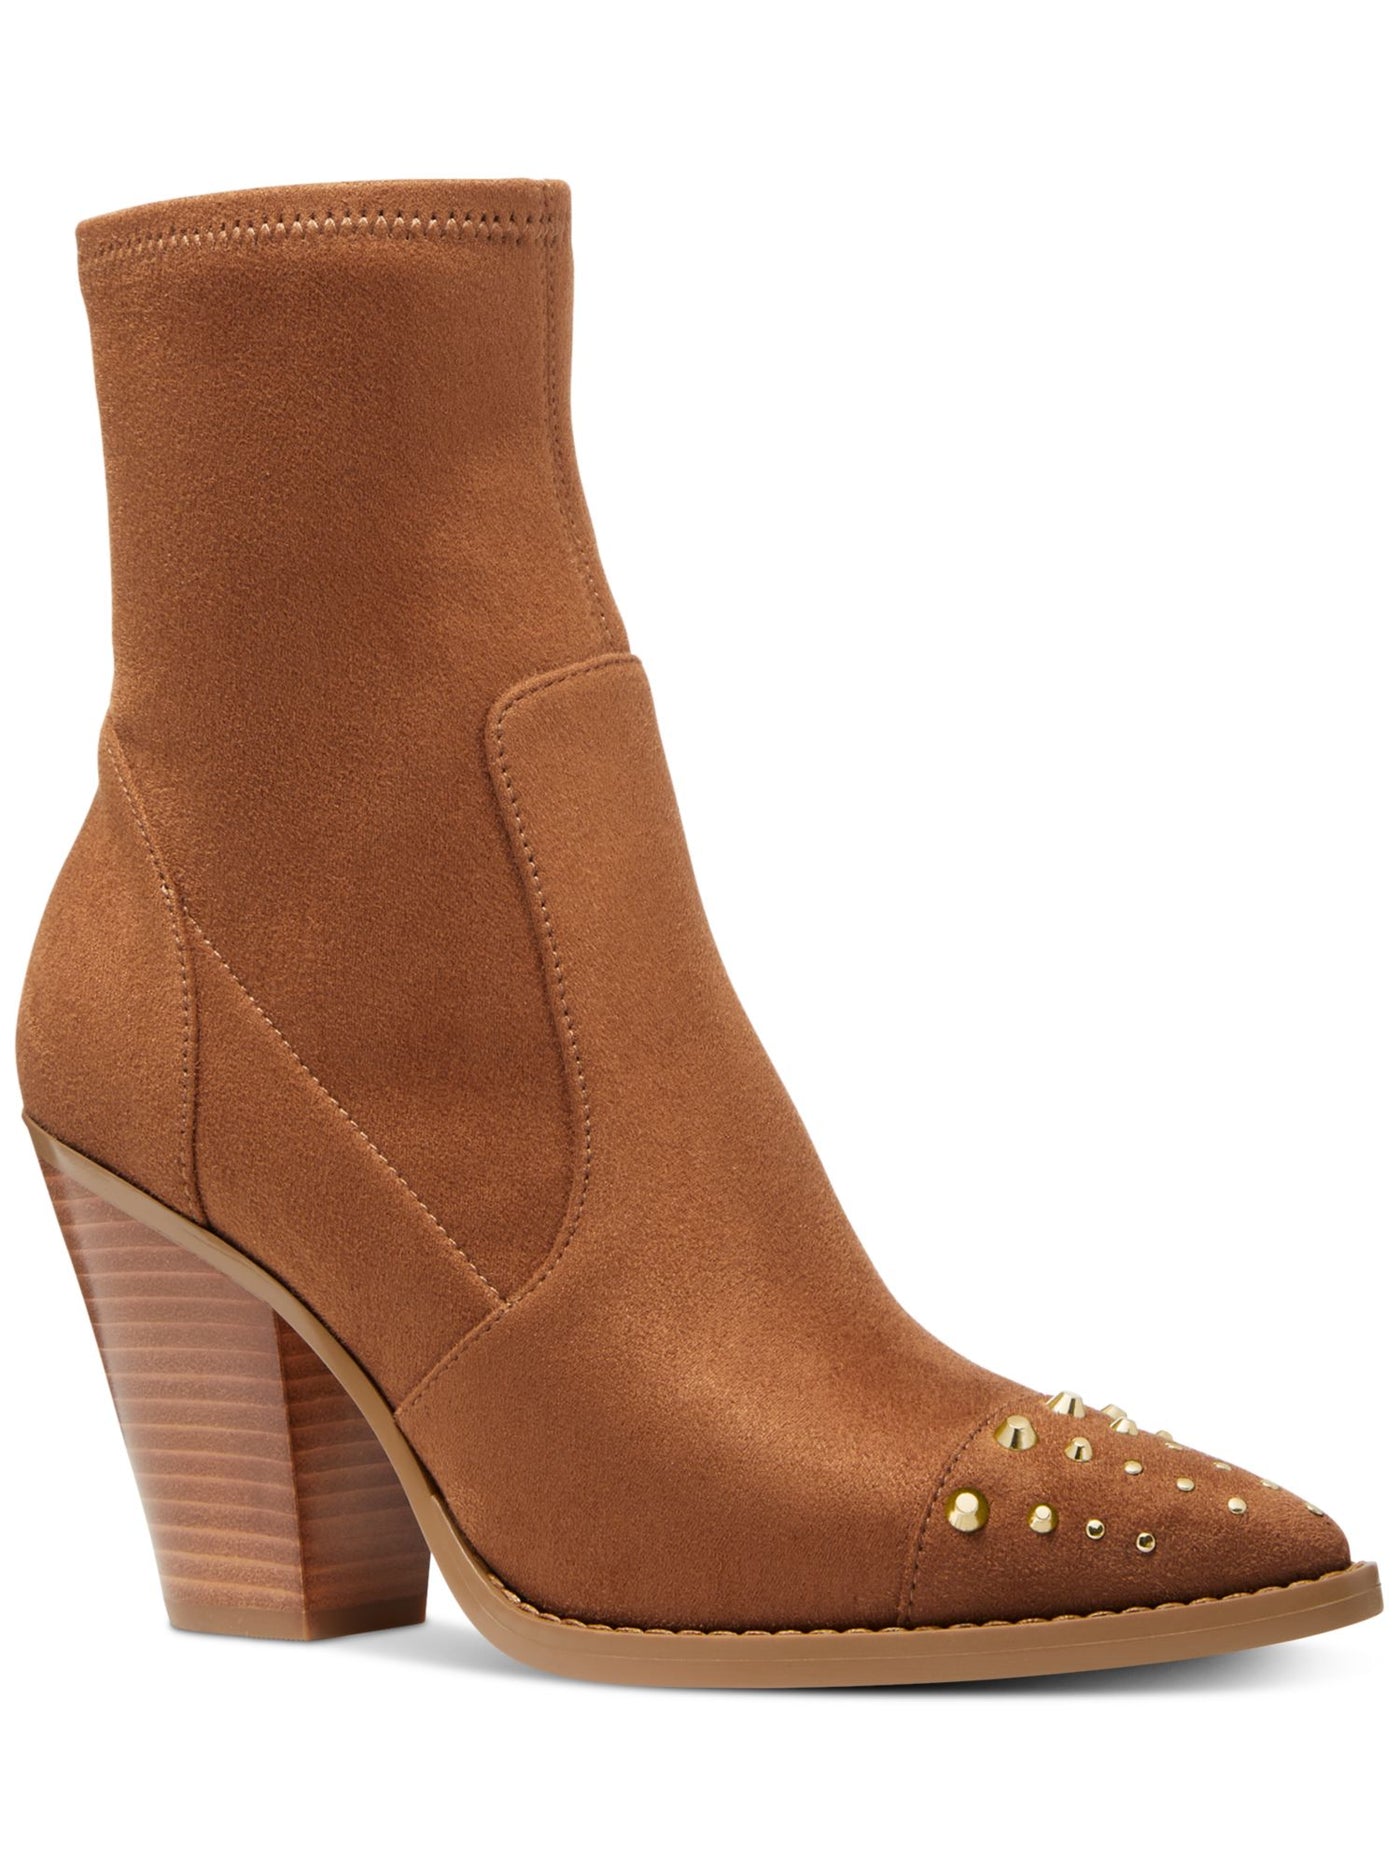 MICHAEL MICHAEL KORS Womens Brown Studded Padded Dover Pointed Toe Stacked Heel Zip-Up Dress Booties 8 M